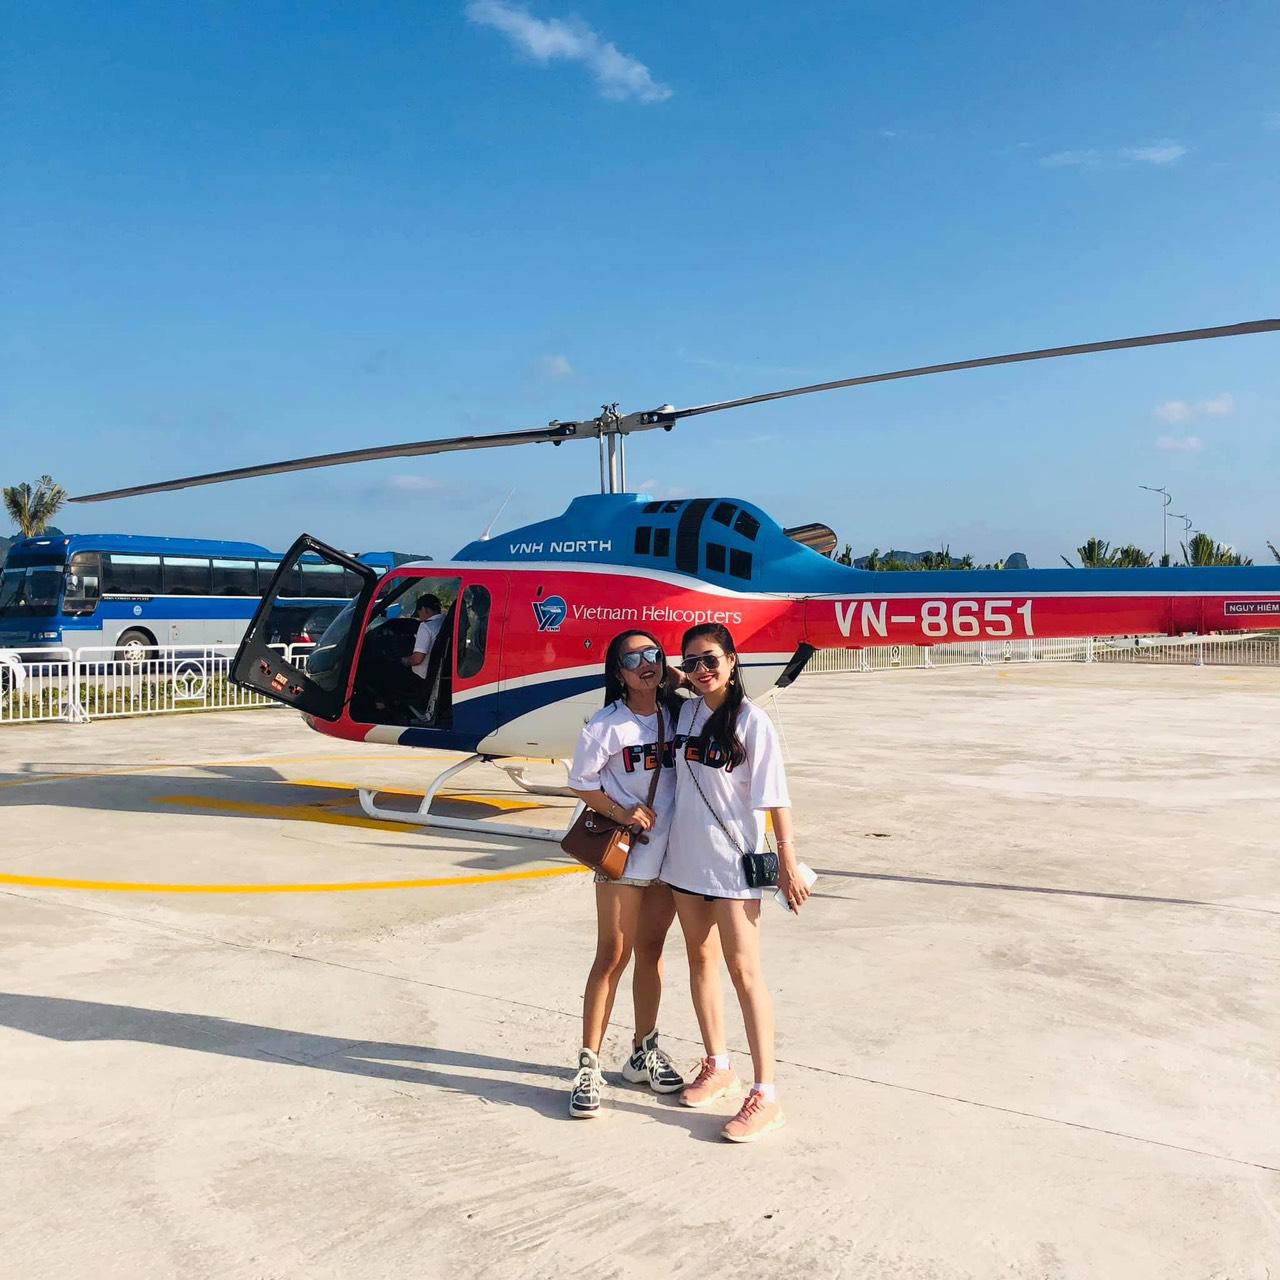 Charter Bell 505 Helicopter to Ha Long Bay from Hanoi